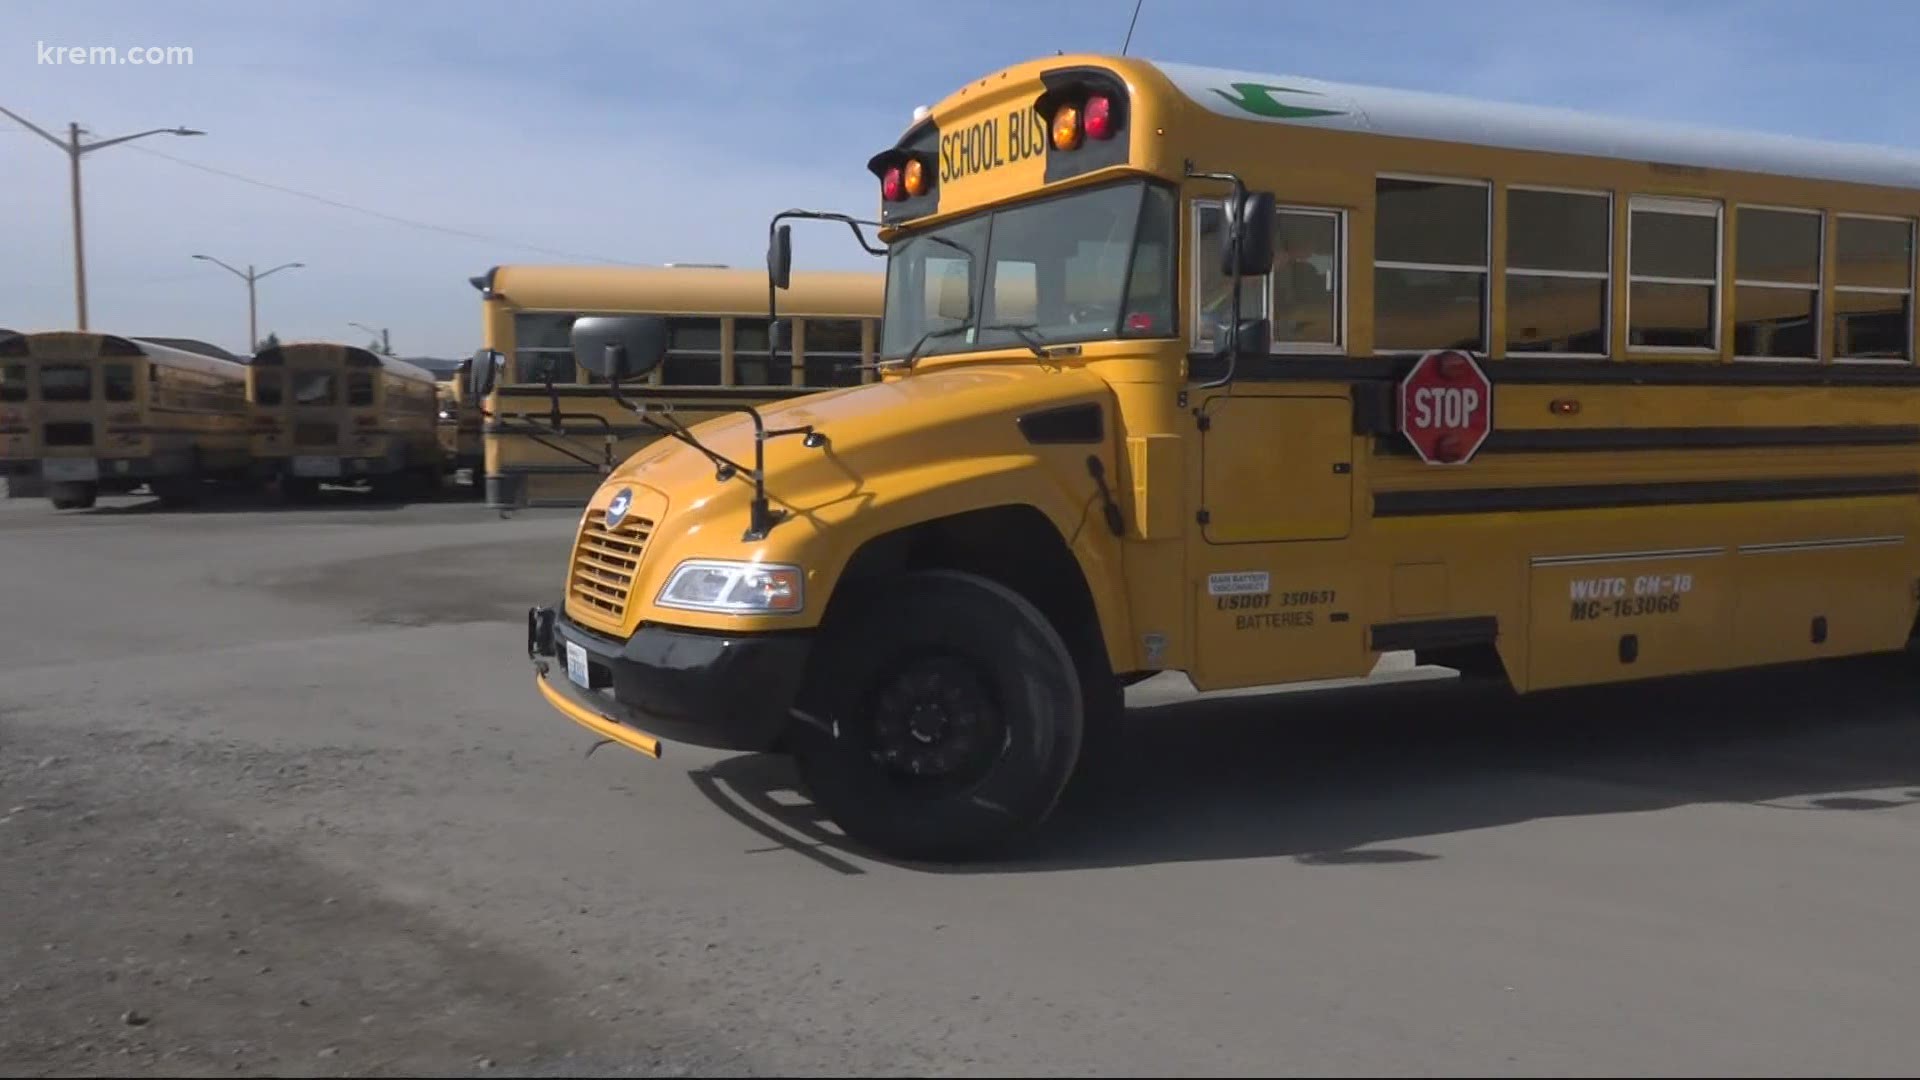 A spokesperson for Spokane Public Schools said "there are no indications that transmission occurred on school buses" in response to the COVID-19 cases.